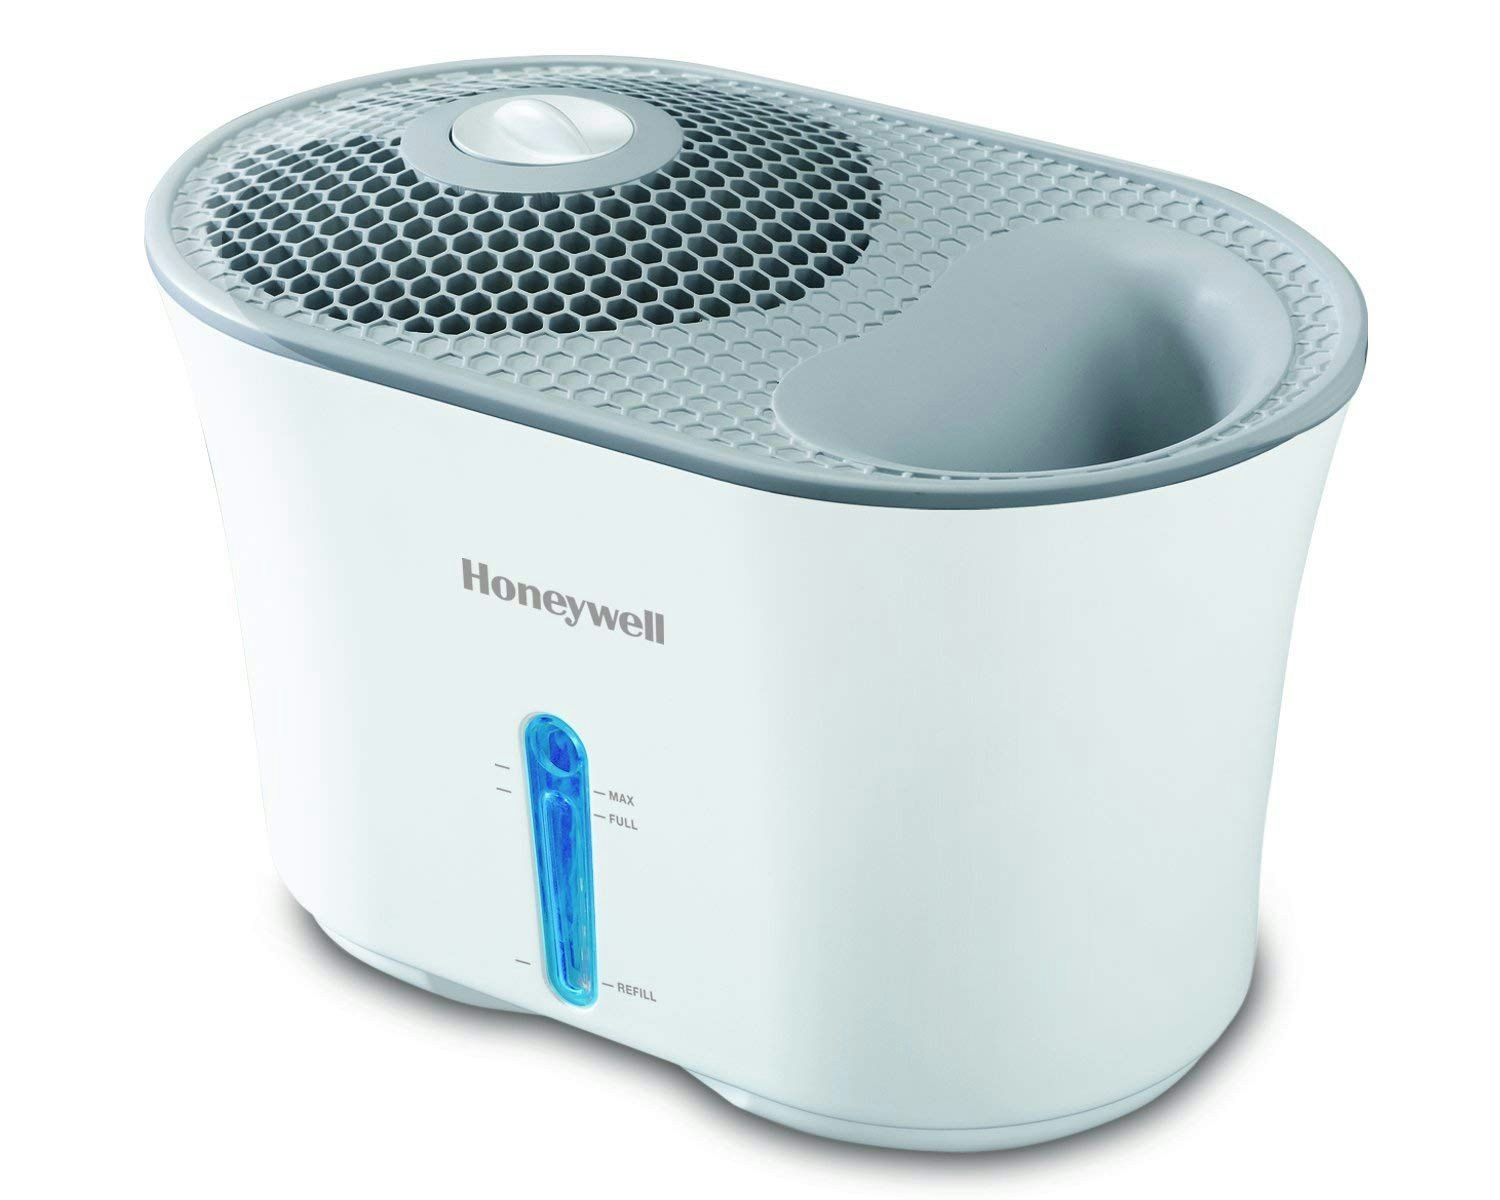 cleanest cool mist humidifier